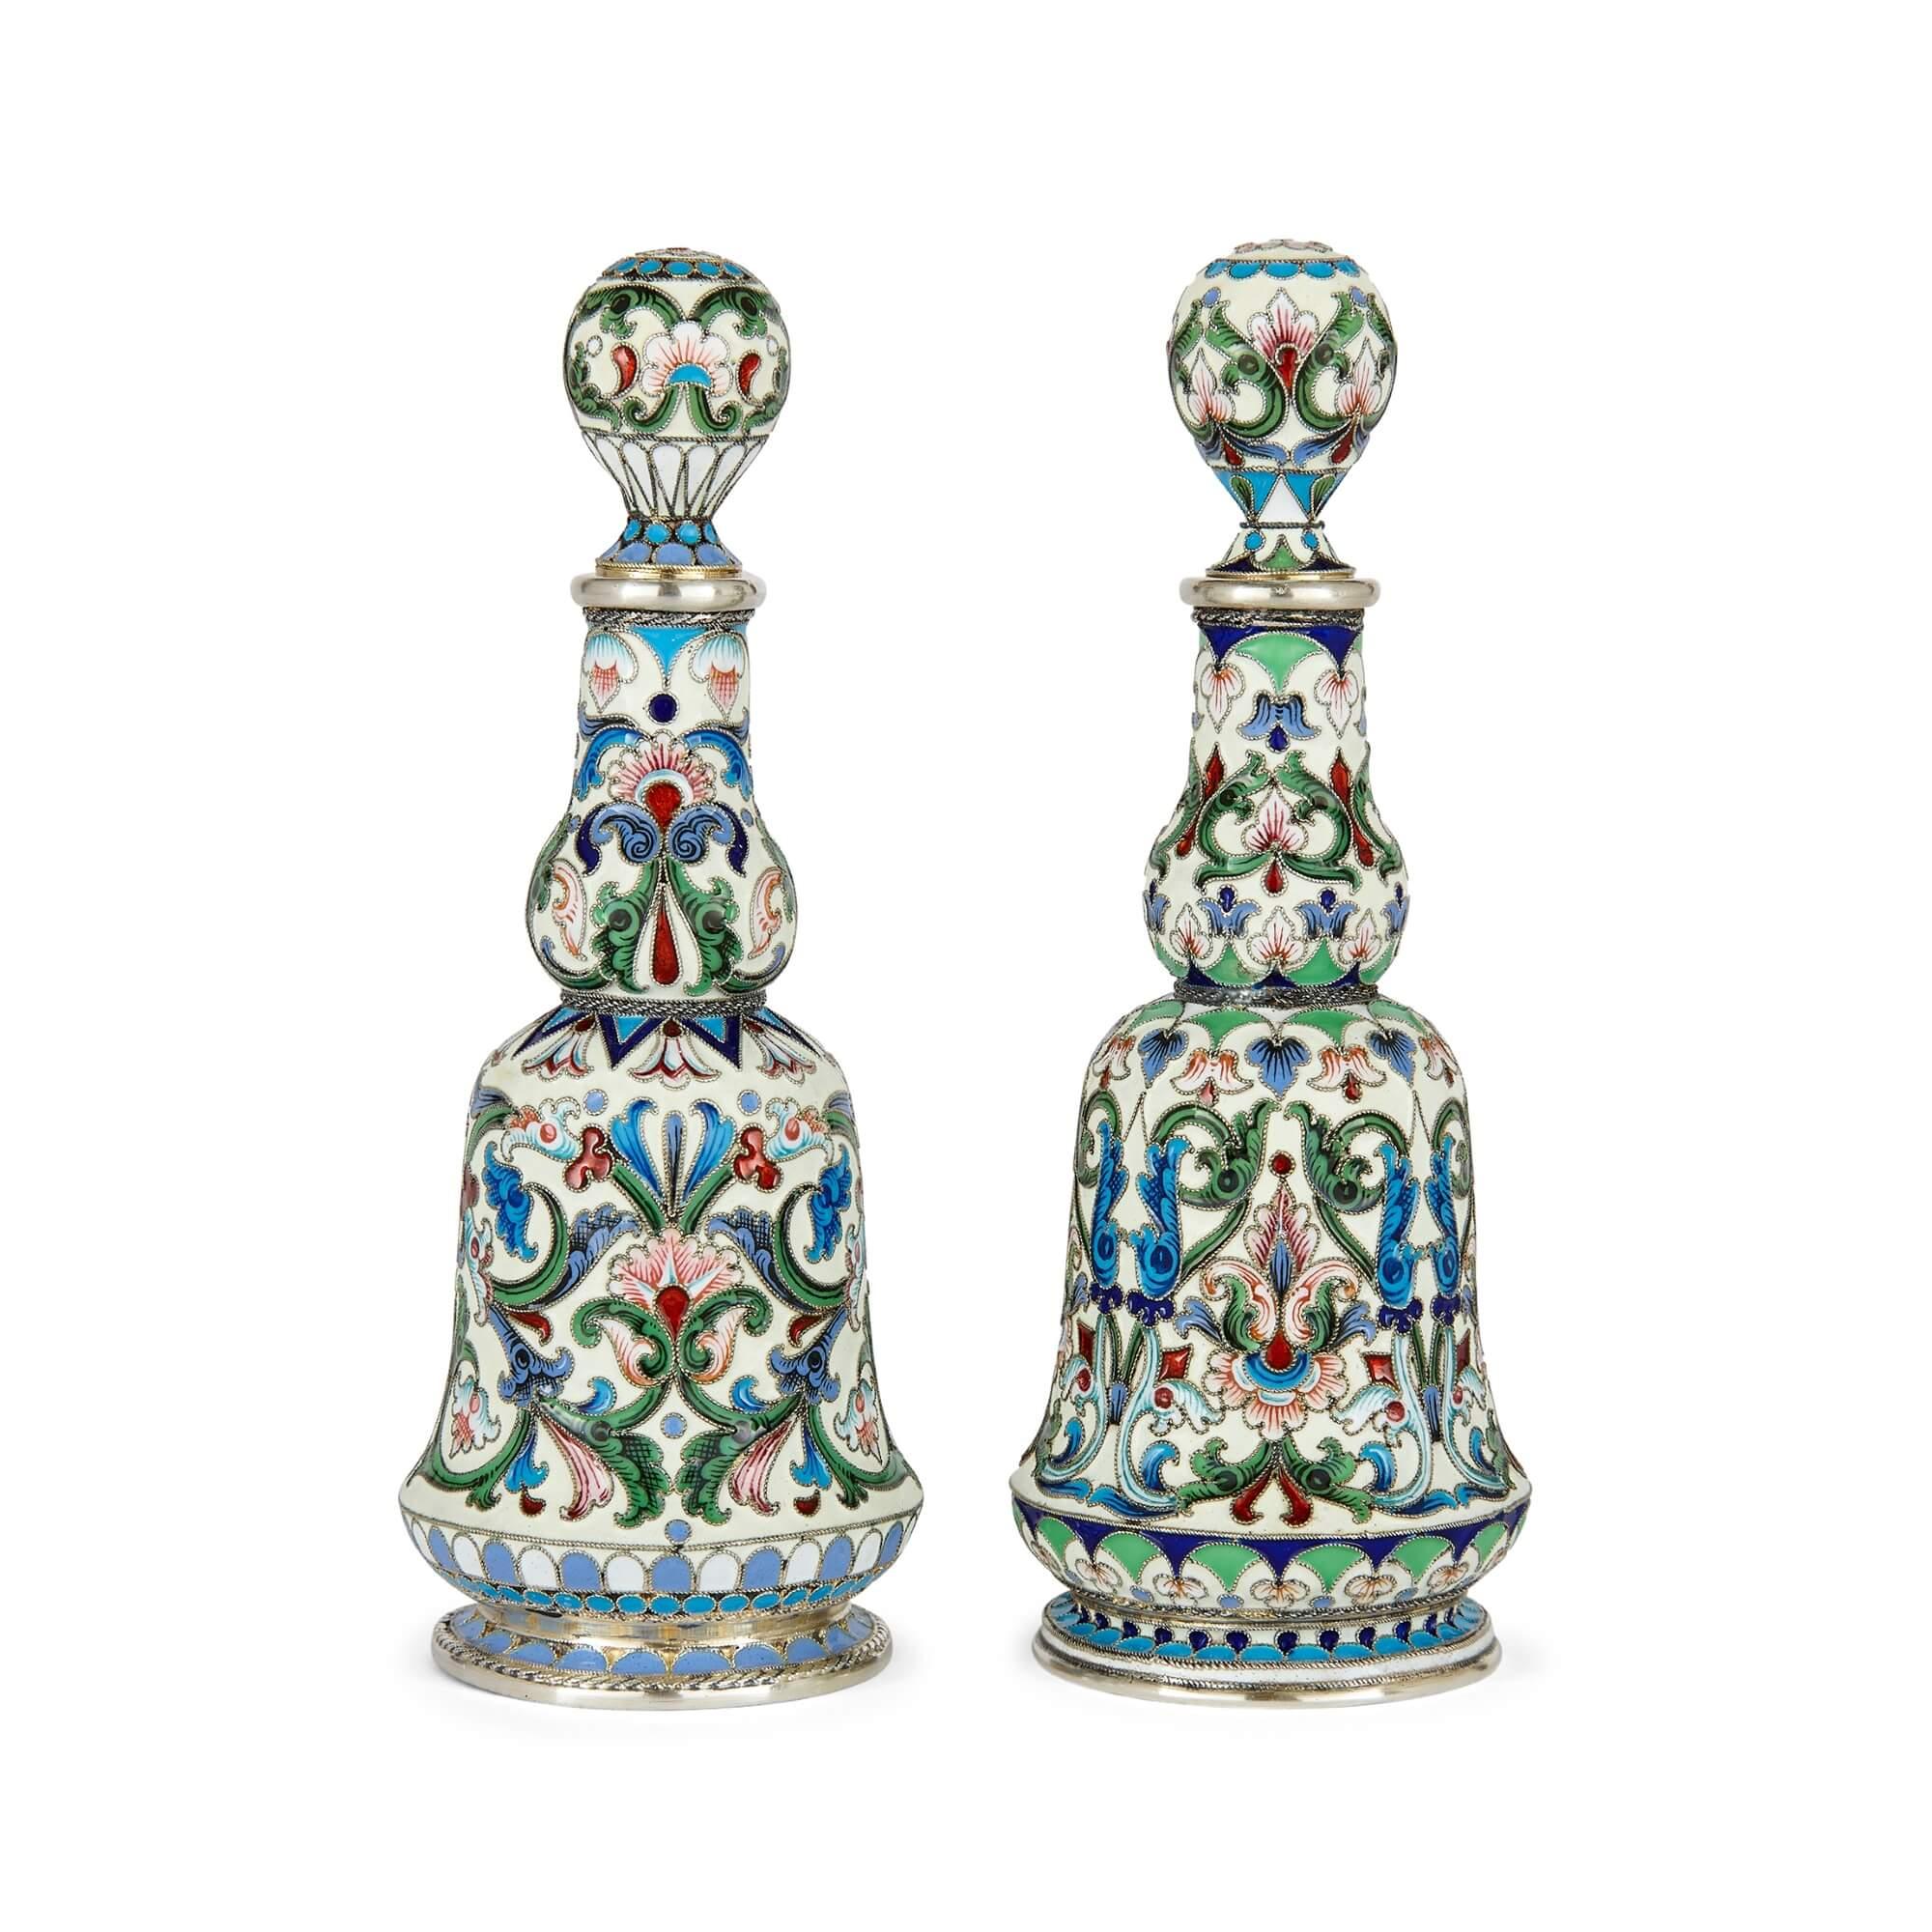 Set of two Russian silver gilt and  cloisonné enamel scent bottles
Russian, 20th Century
Height 13.5cm, diameter 5cm

An embodiment of artistry and precision, this pair of scent bottles radiates the richness and refined craftsmanship of Russia's